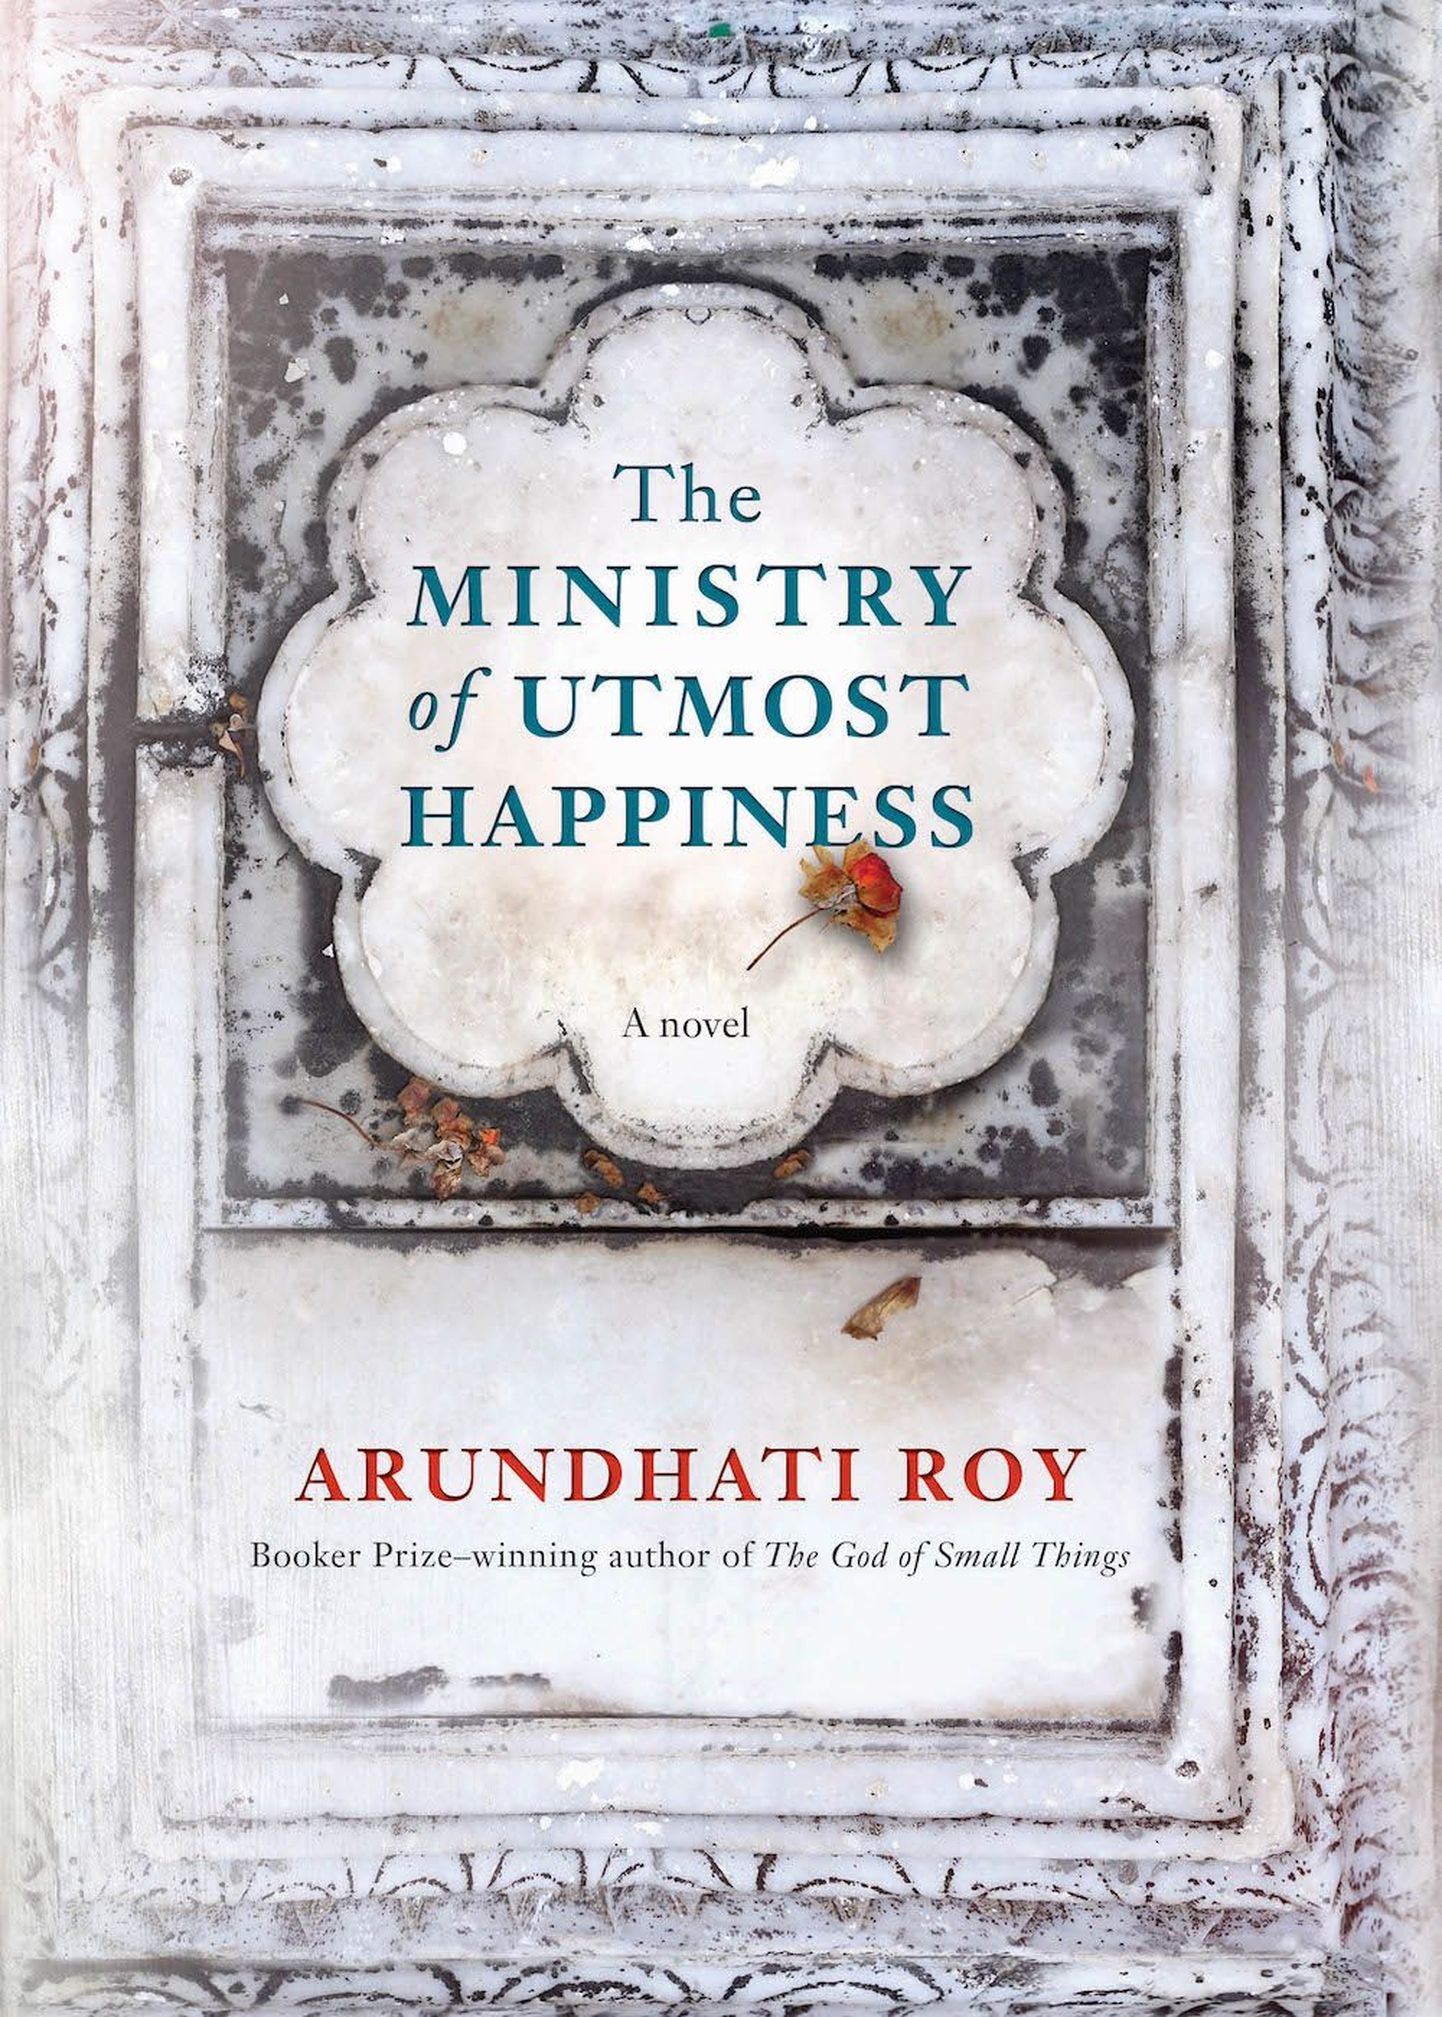 Arundhati Roy uus romaan «The Ministry of Utmost Happiness».